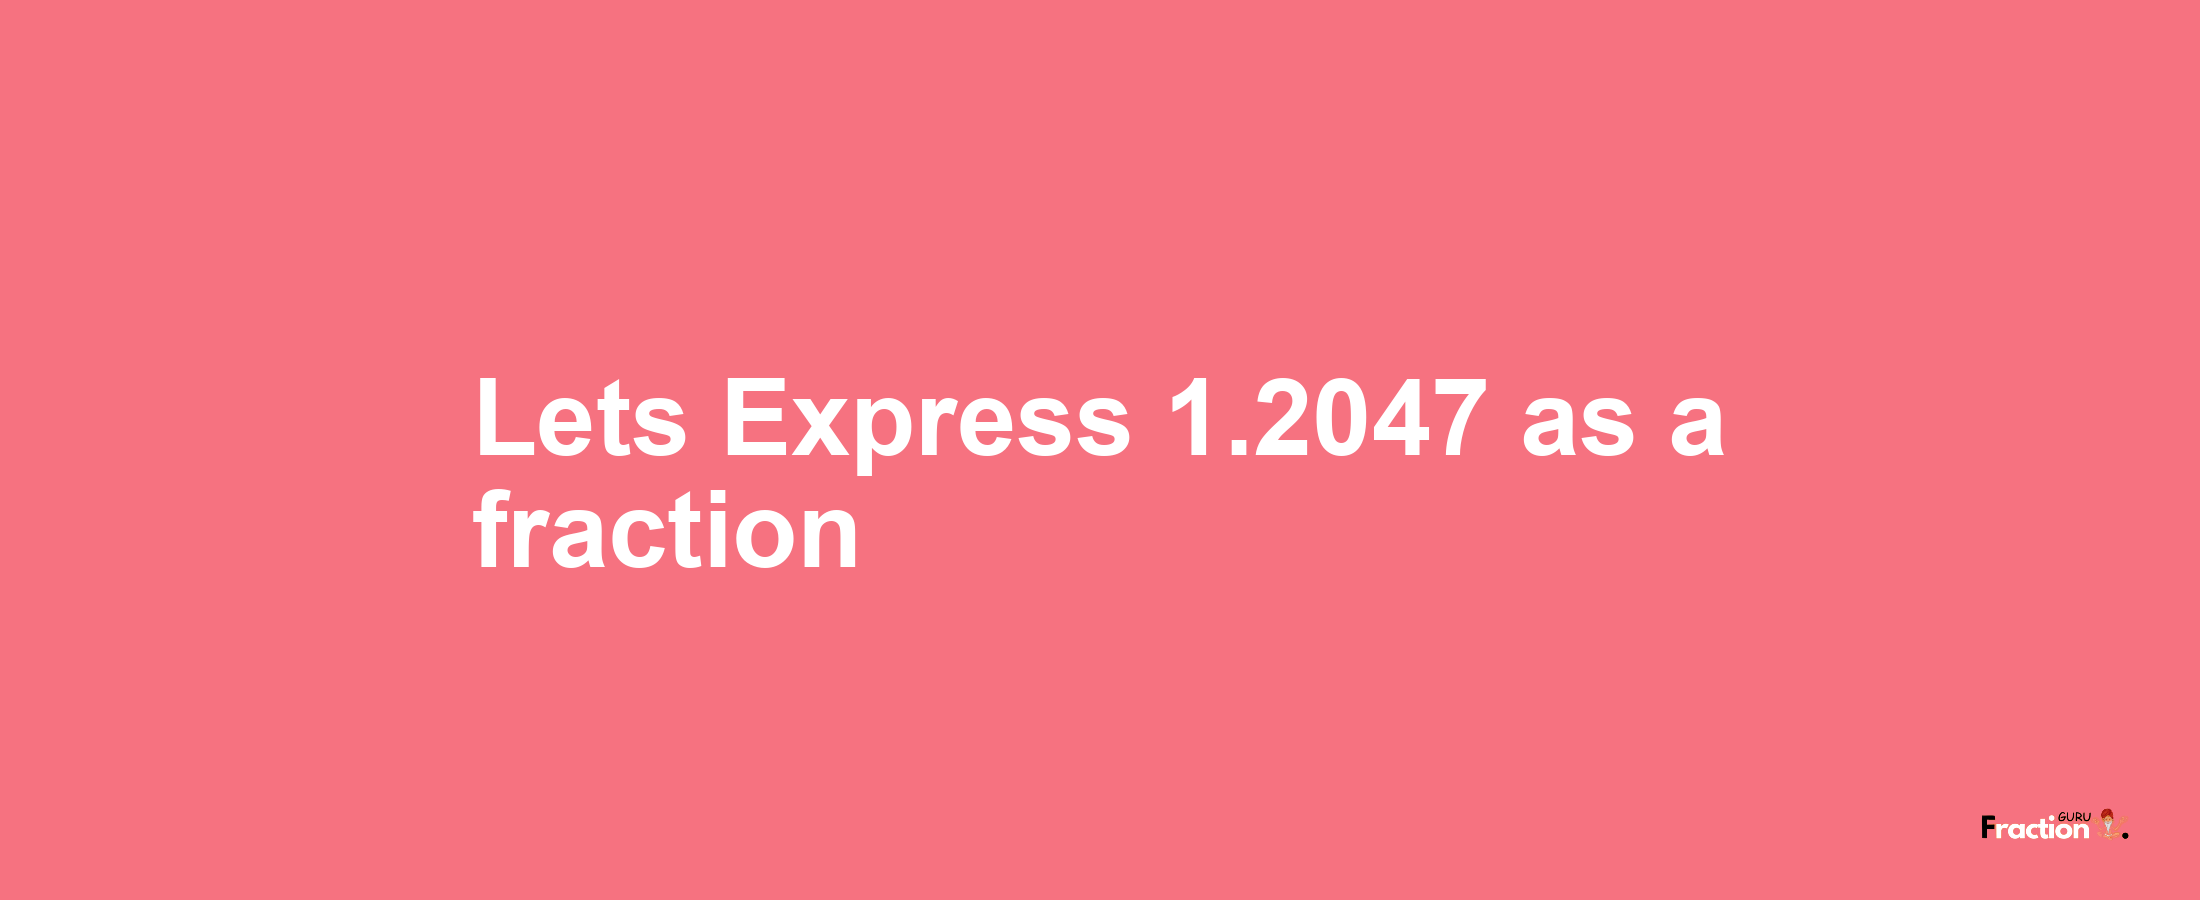 Lets Express 1.2047 as afraction